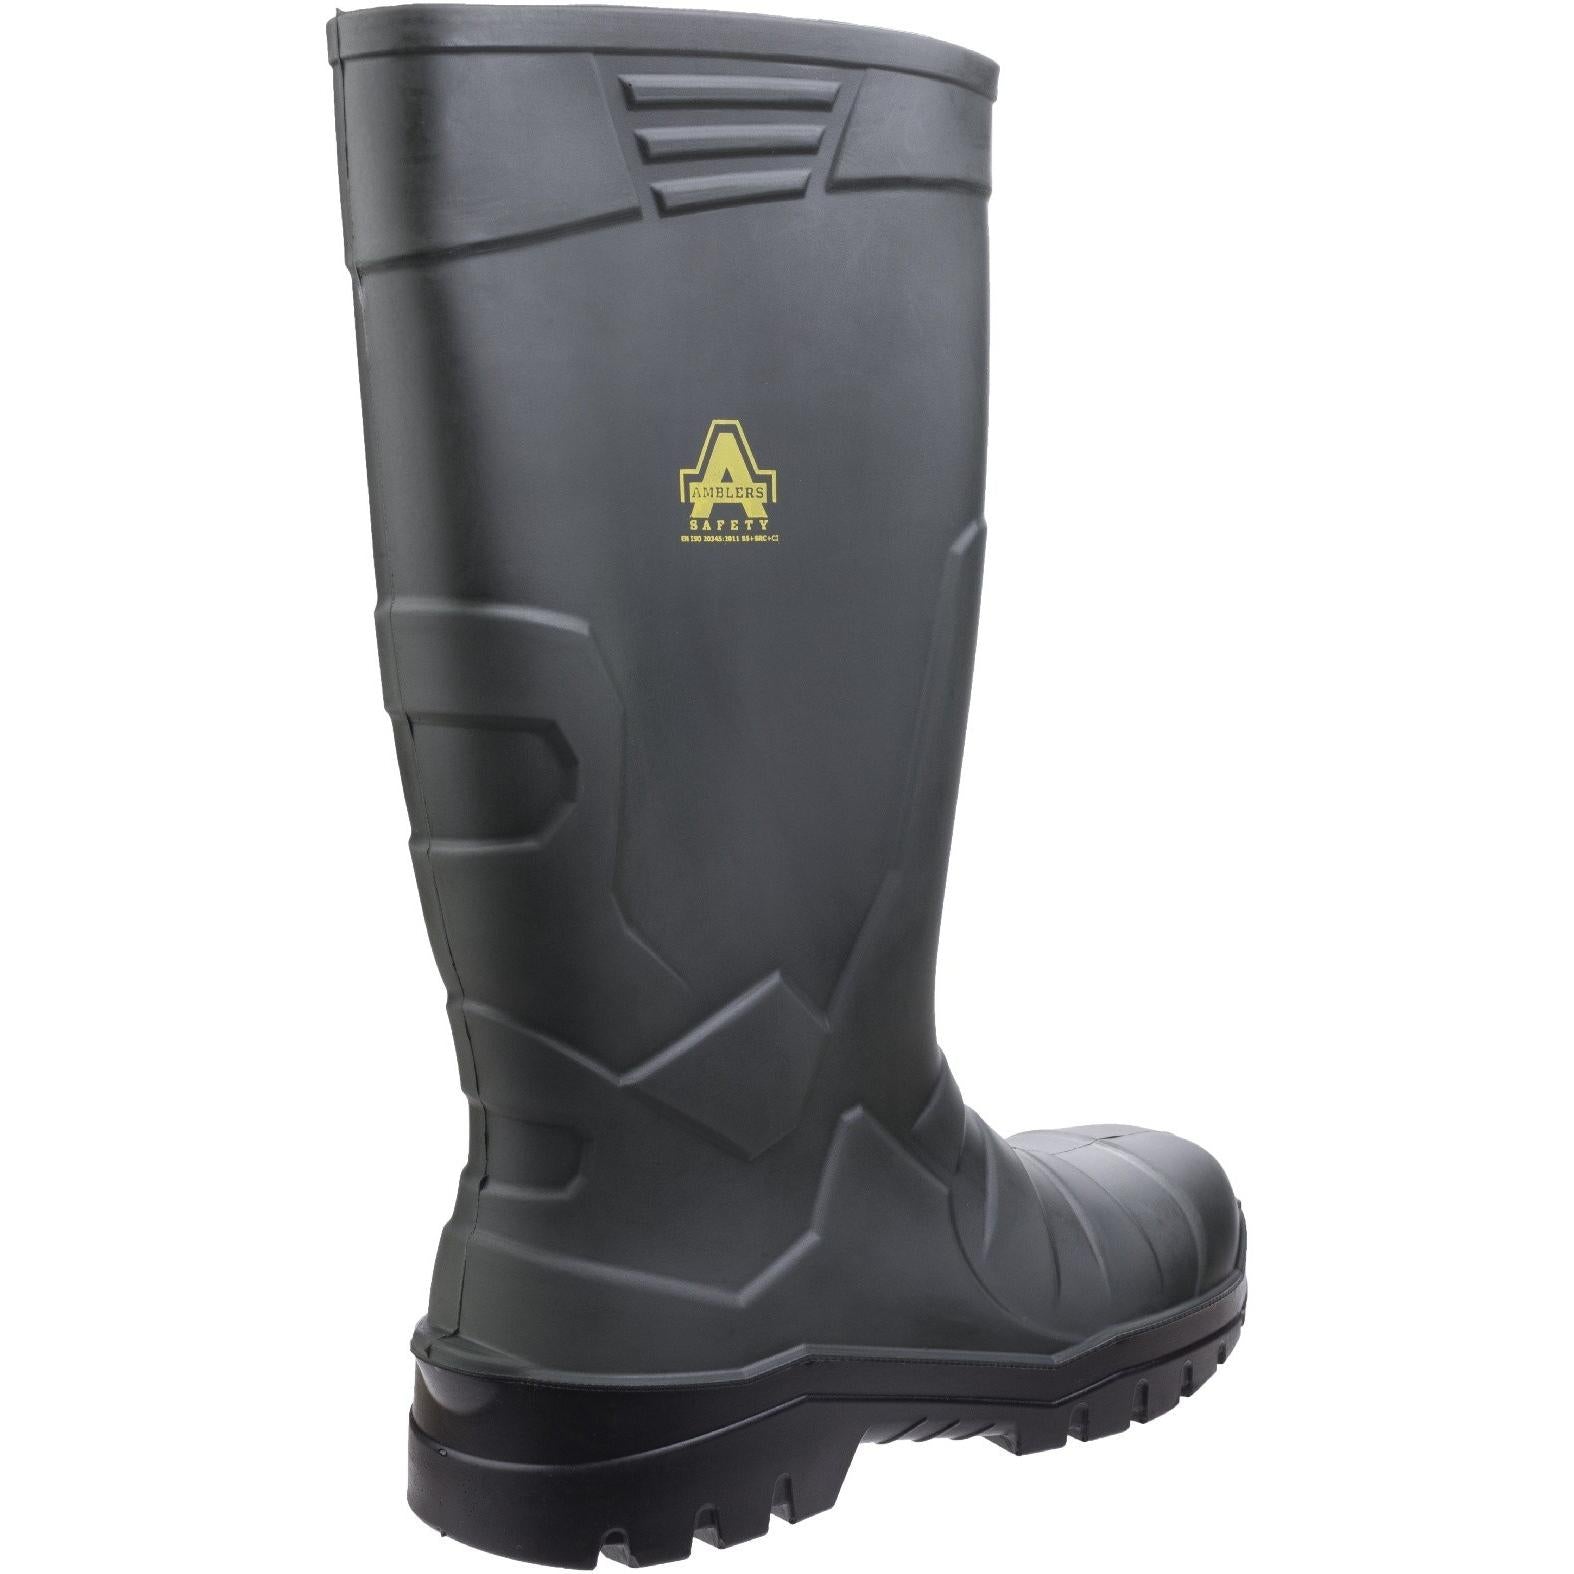 Amblers Safety AS1005 Full Safety Wellington Boots